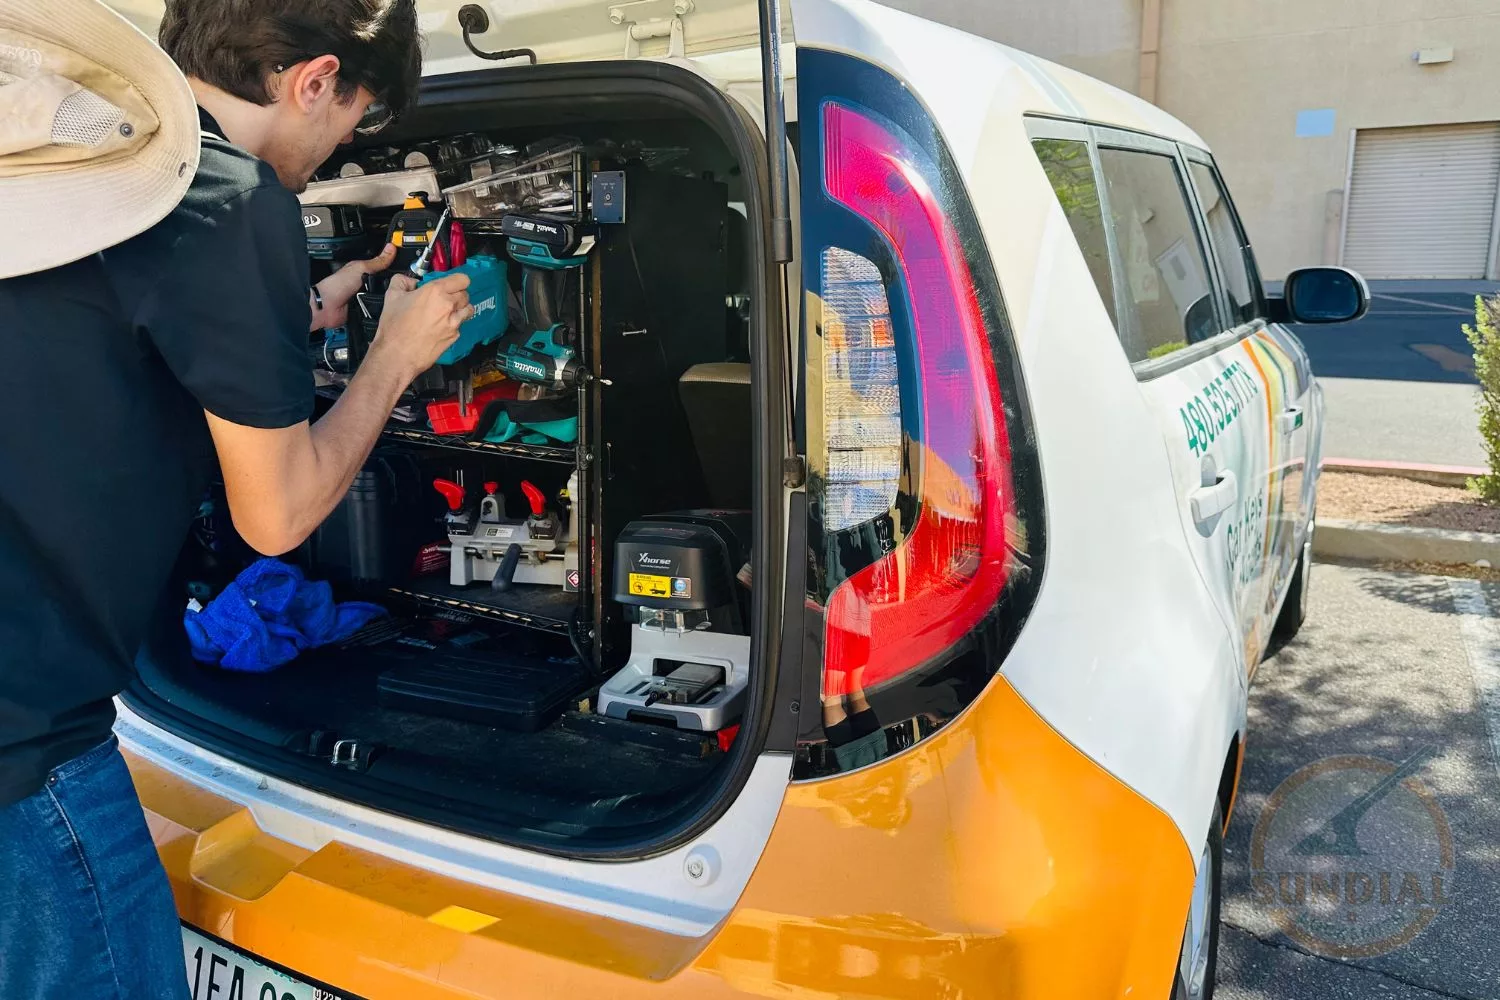 A locksmith works from the back of a service van equipped with various tools and key cutting machines